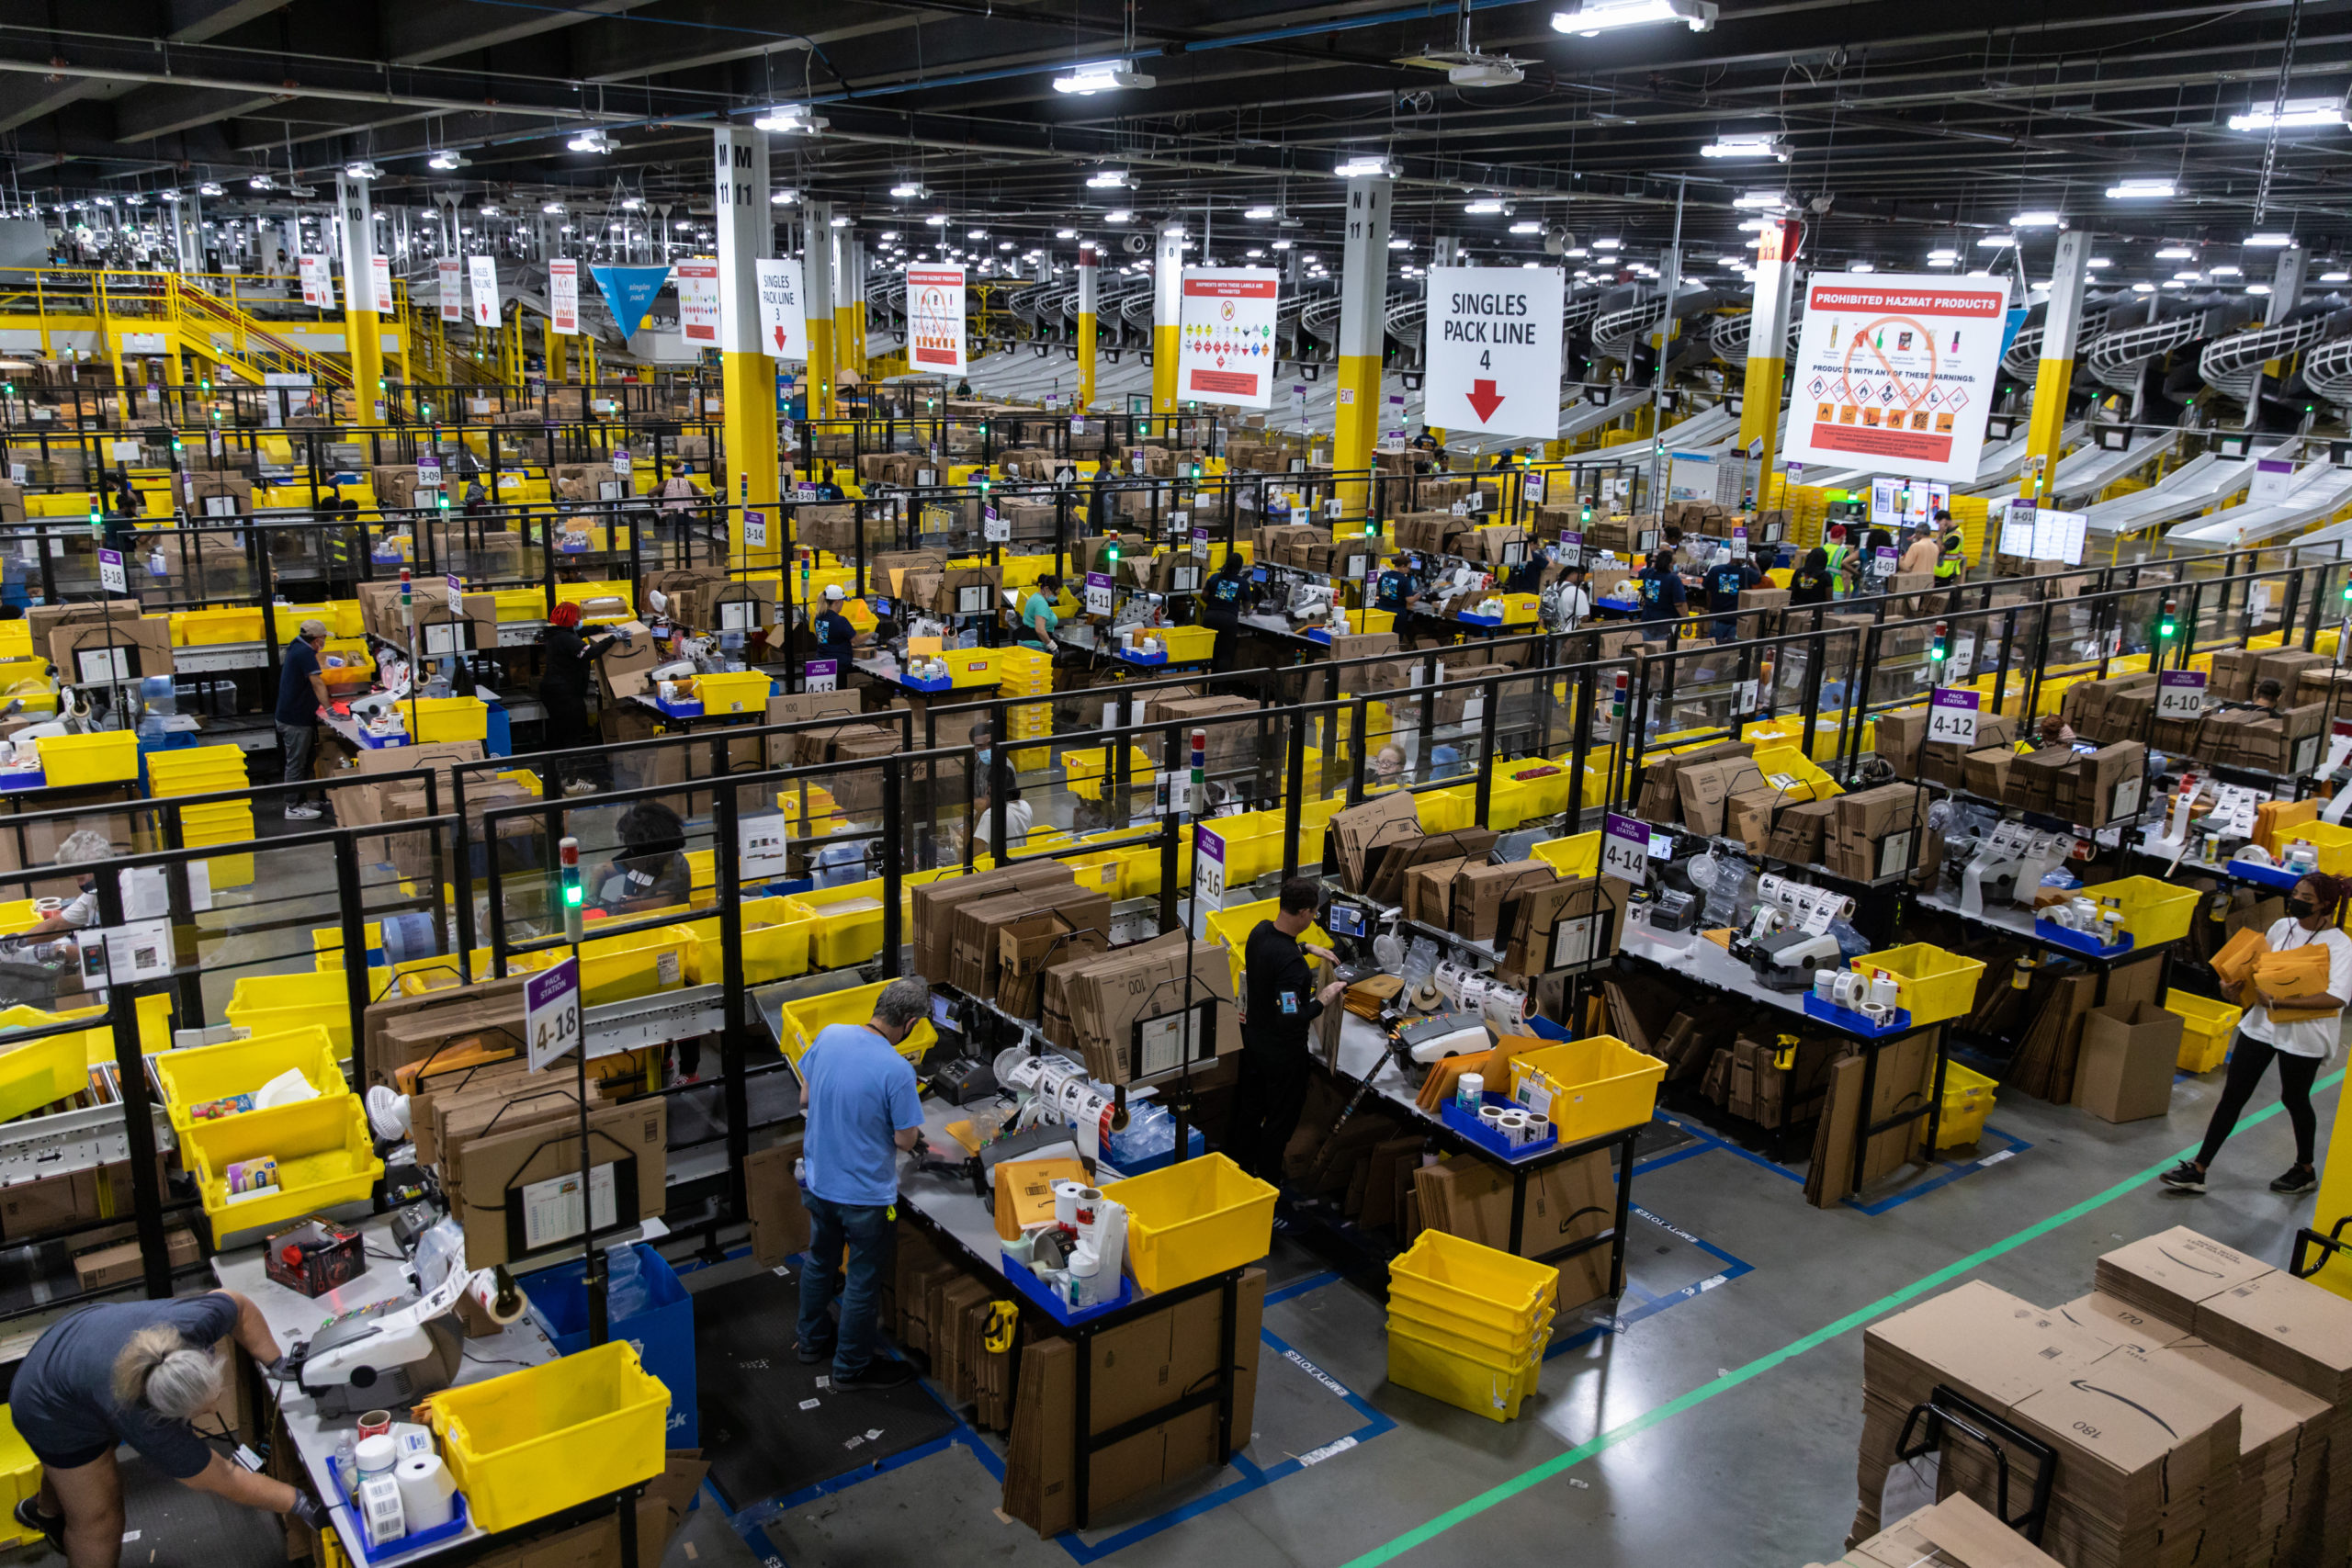 Workers fulfill orders at an Amazon fulfillment center on Prime Day in Raleigh, North Carolina in June 2021